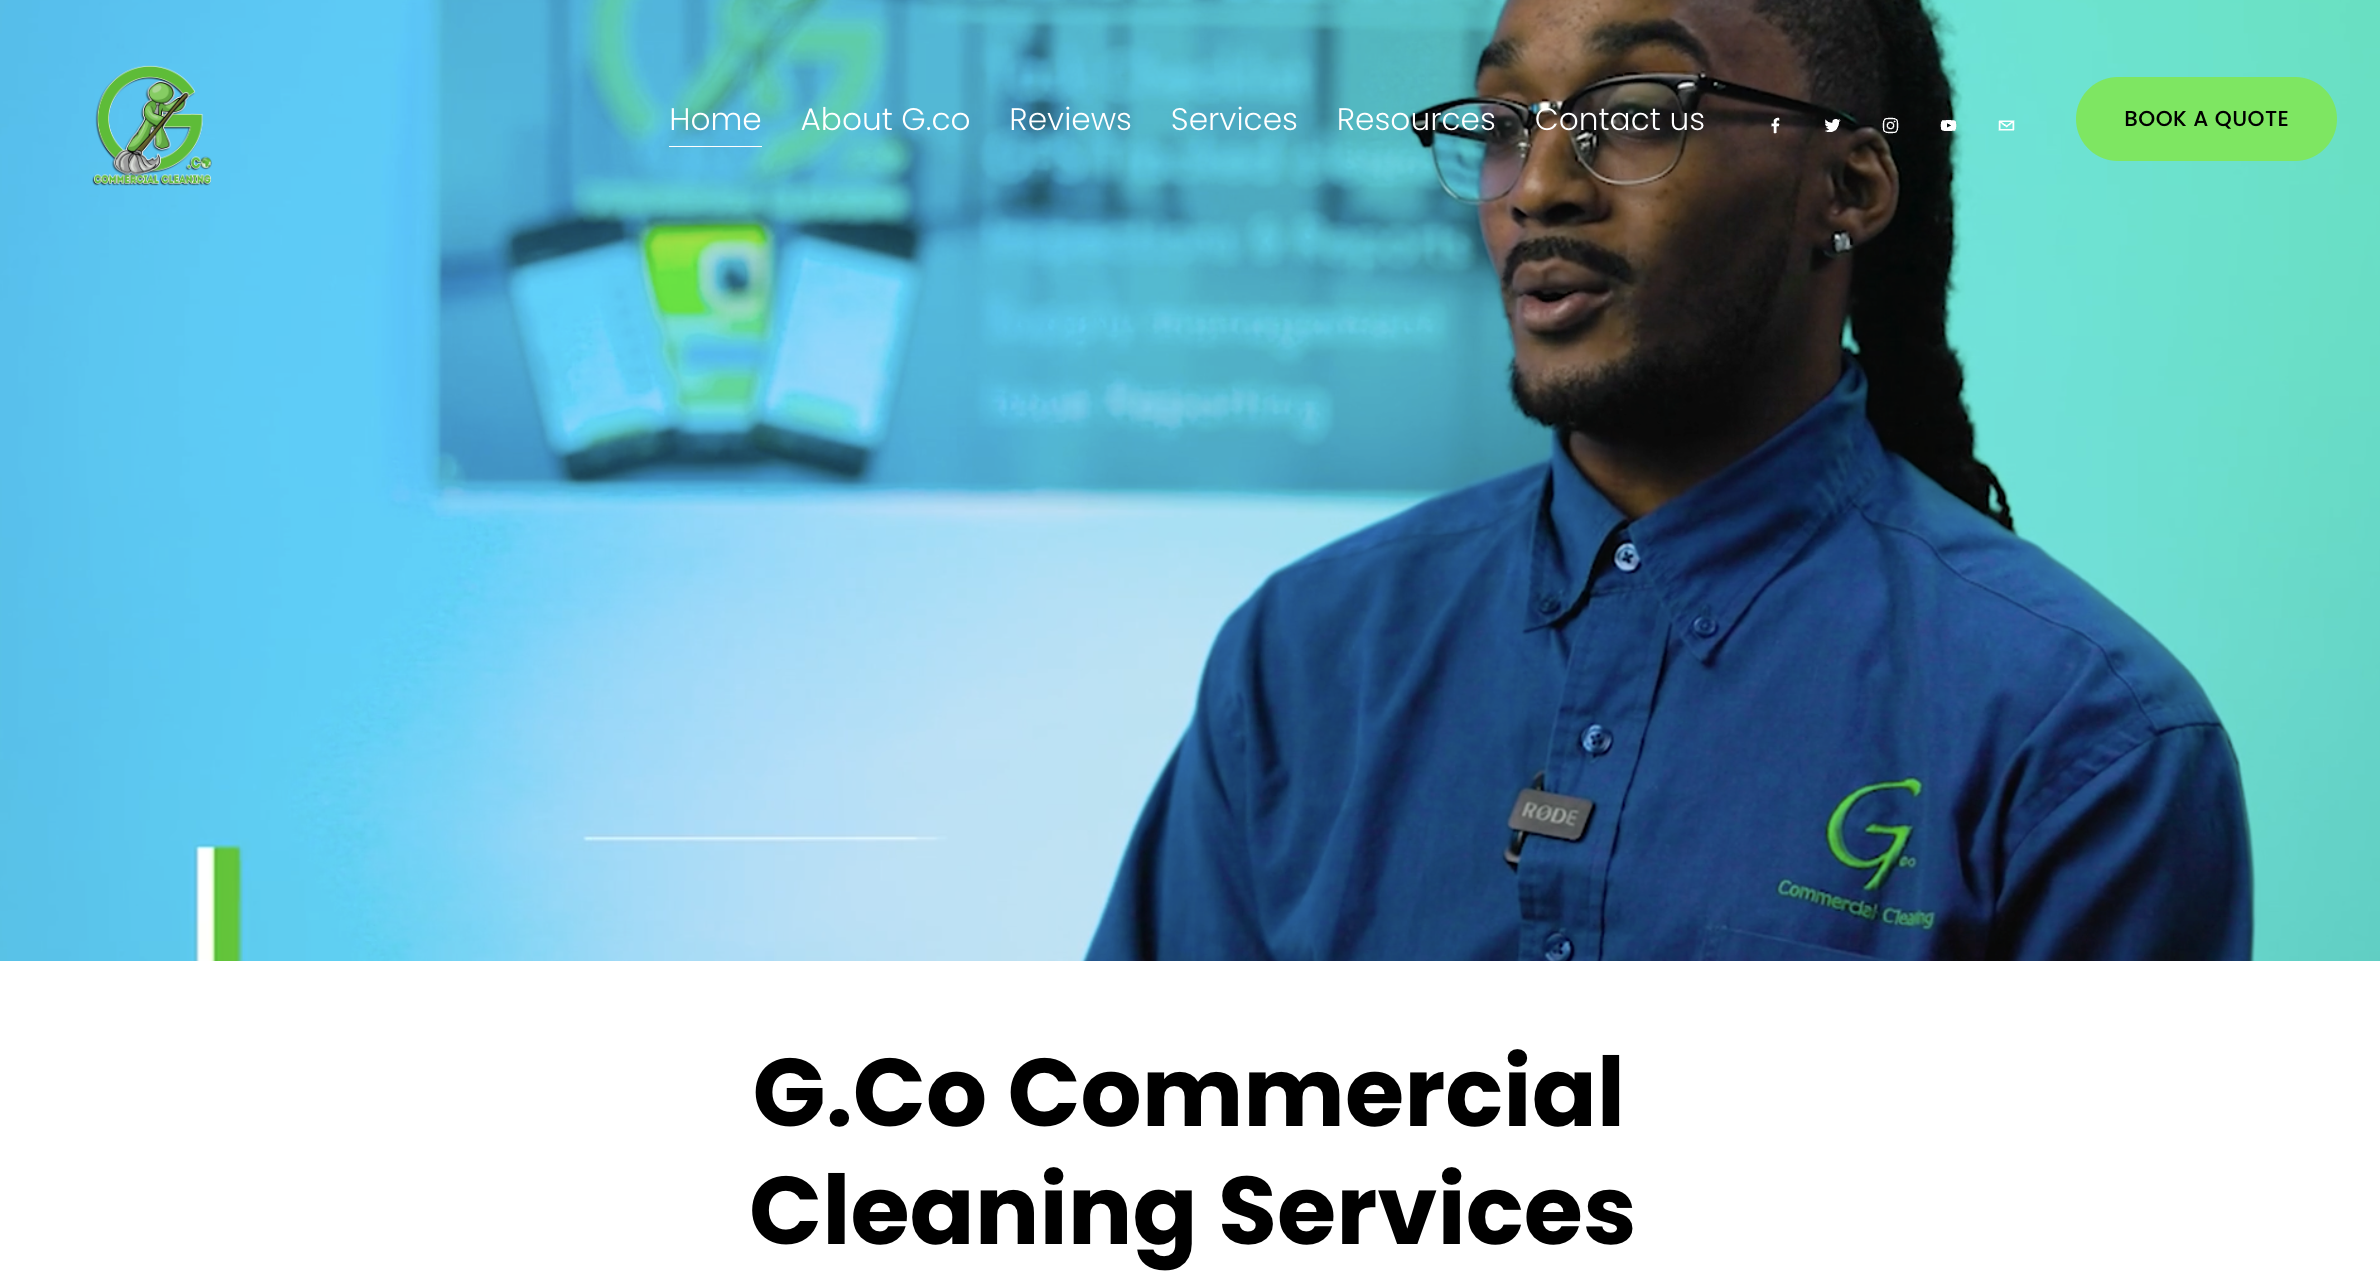 G.Co Commercial Cleaning - Gcocommercialcleaning.com